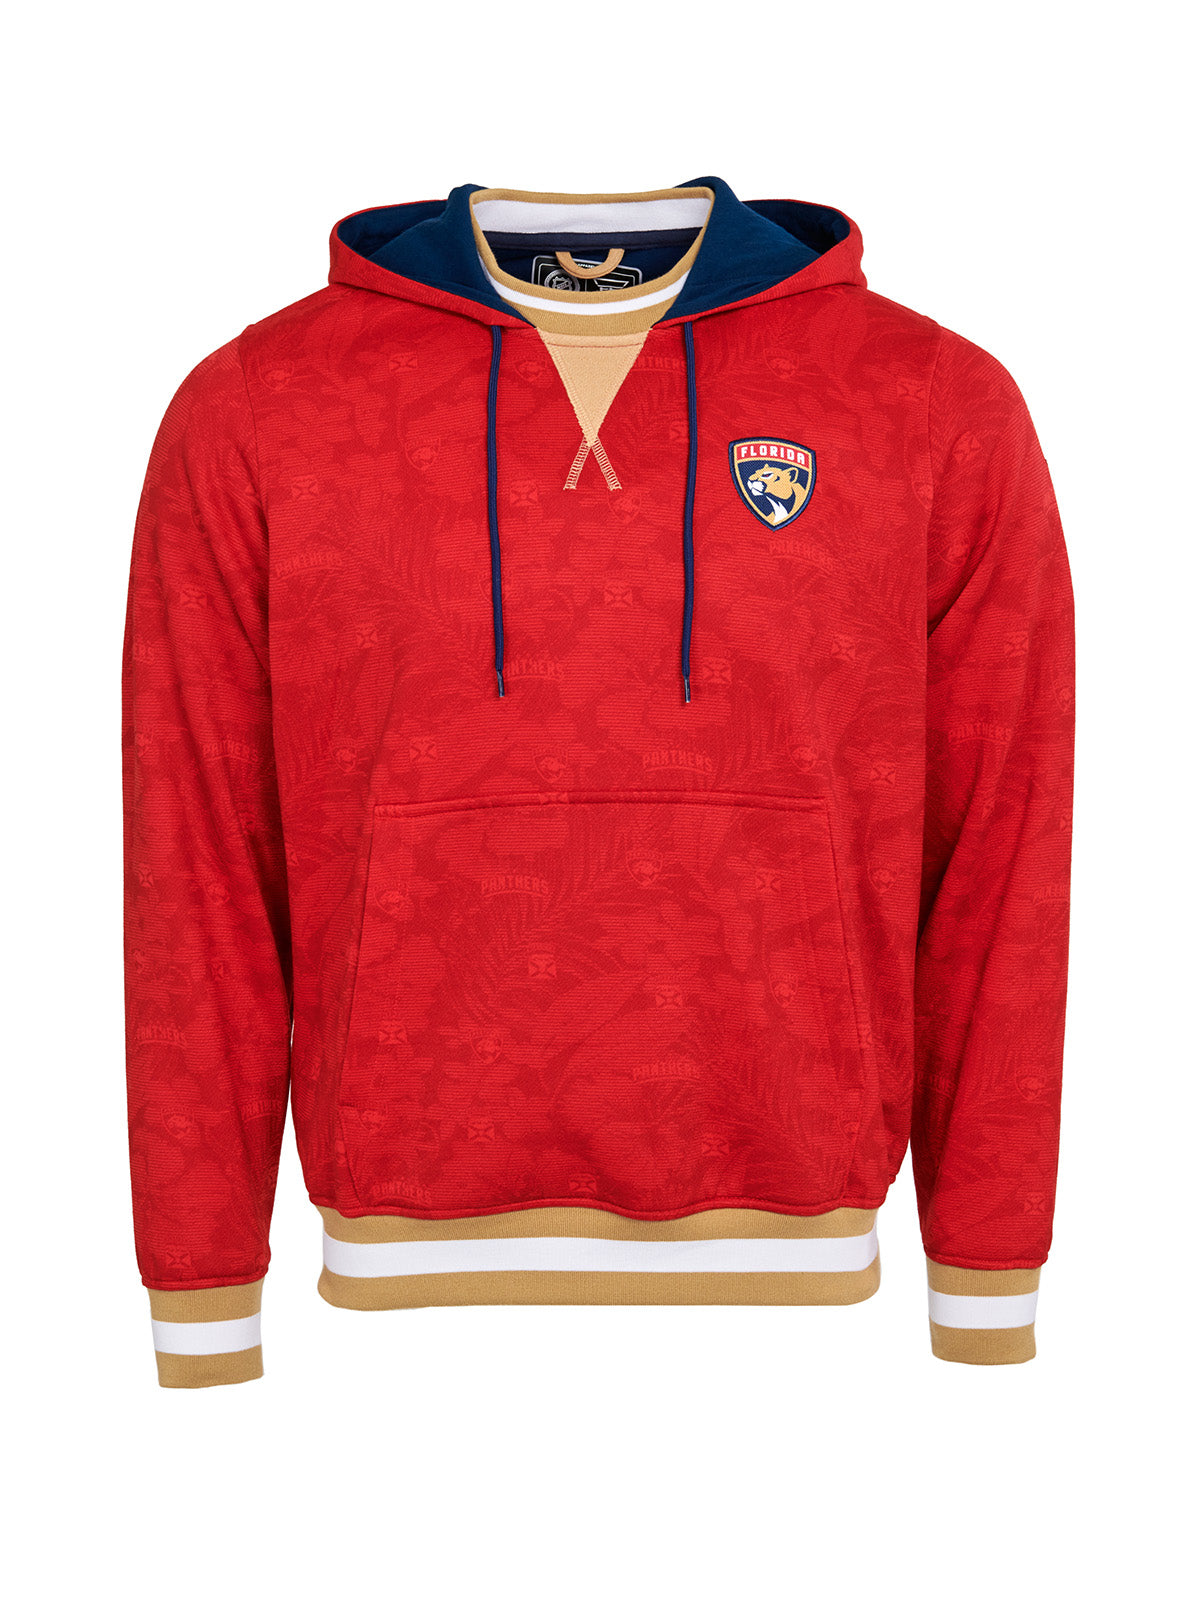 Florida Panthers Hoodie - Show your team spirit, with the iconic team logo patch on the front left chest, and proudly display your Florida Panthers support in their team colors with this NHL hockey hoodie.